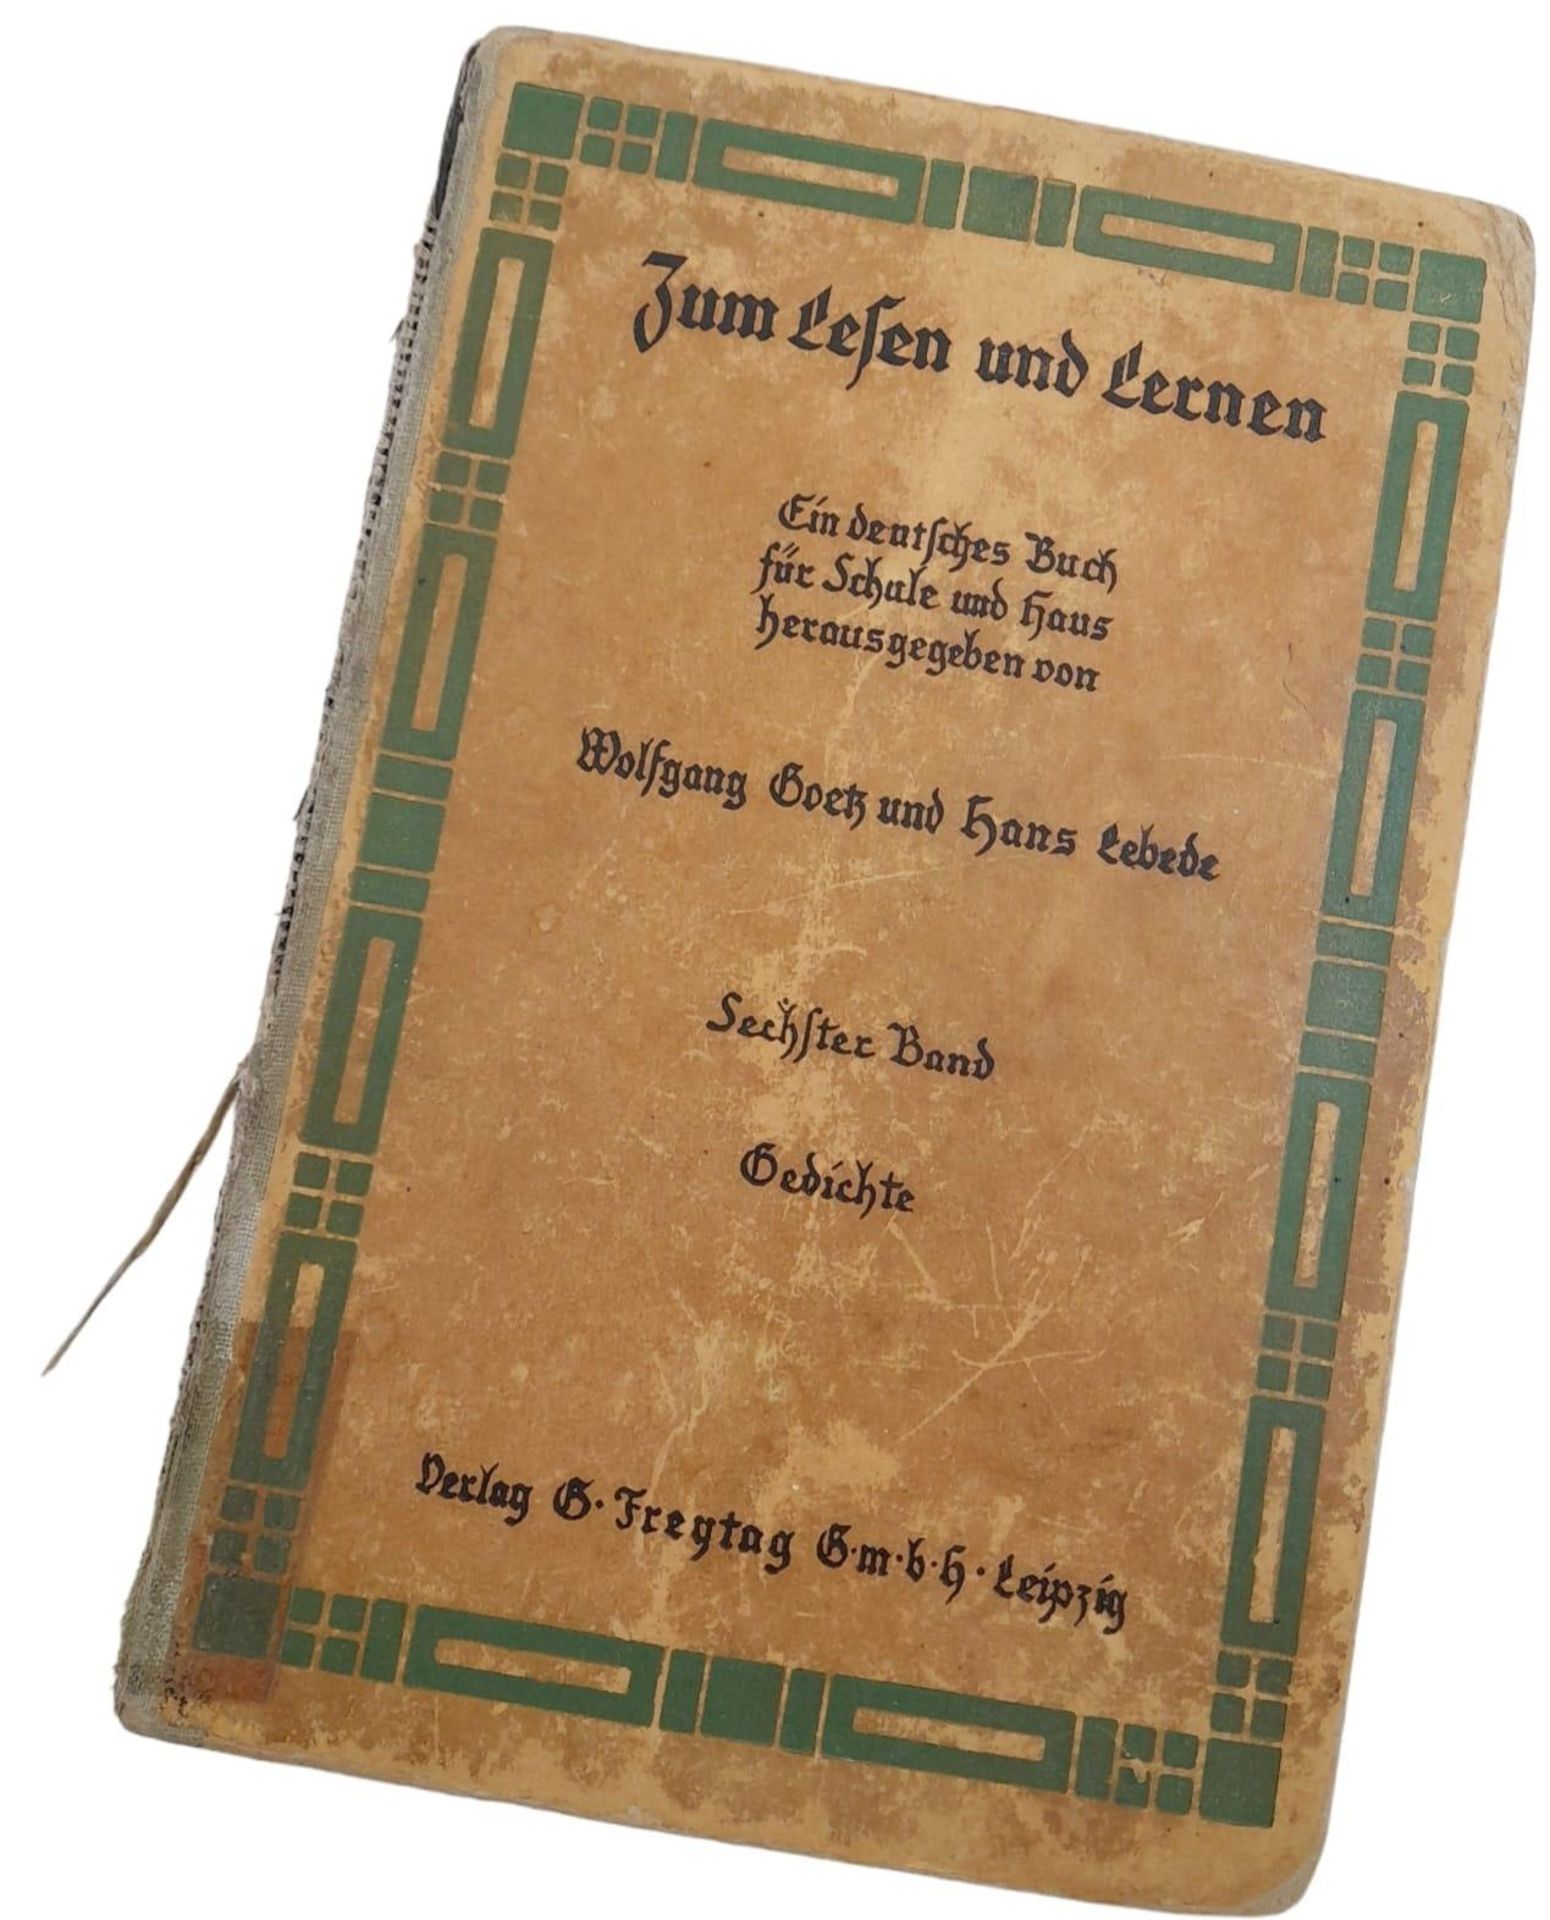 WW2 German Book from a Kriegsmarine U-Boat Library. Each boat had a box of books and would change